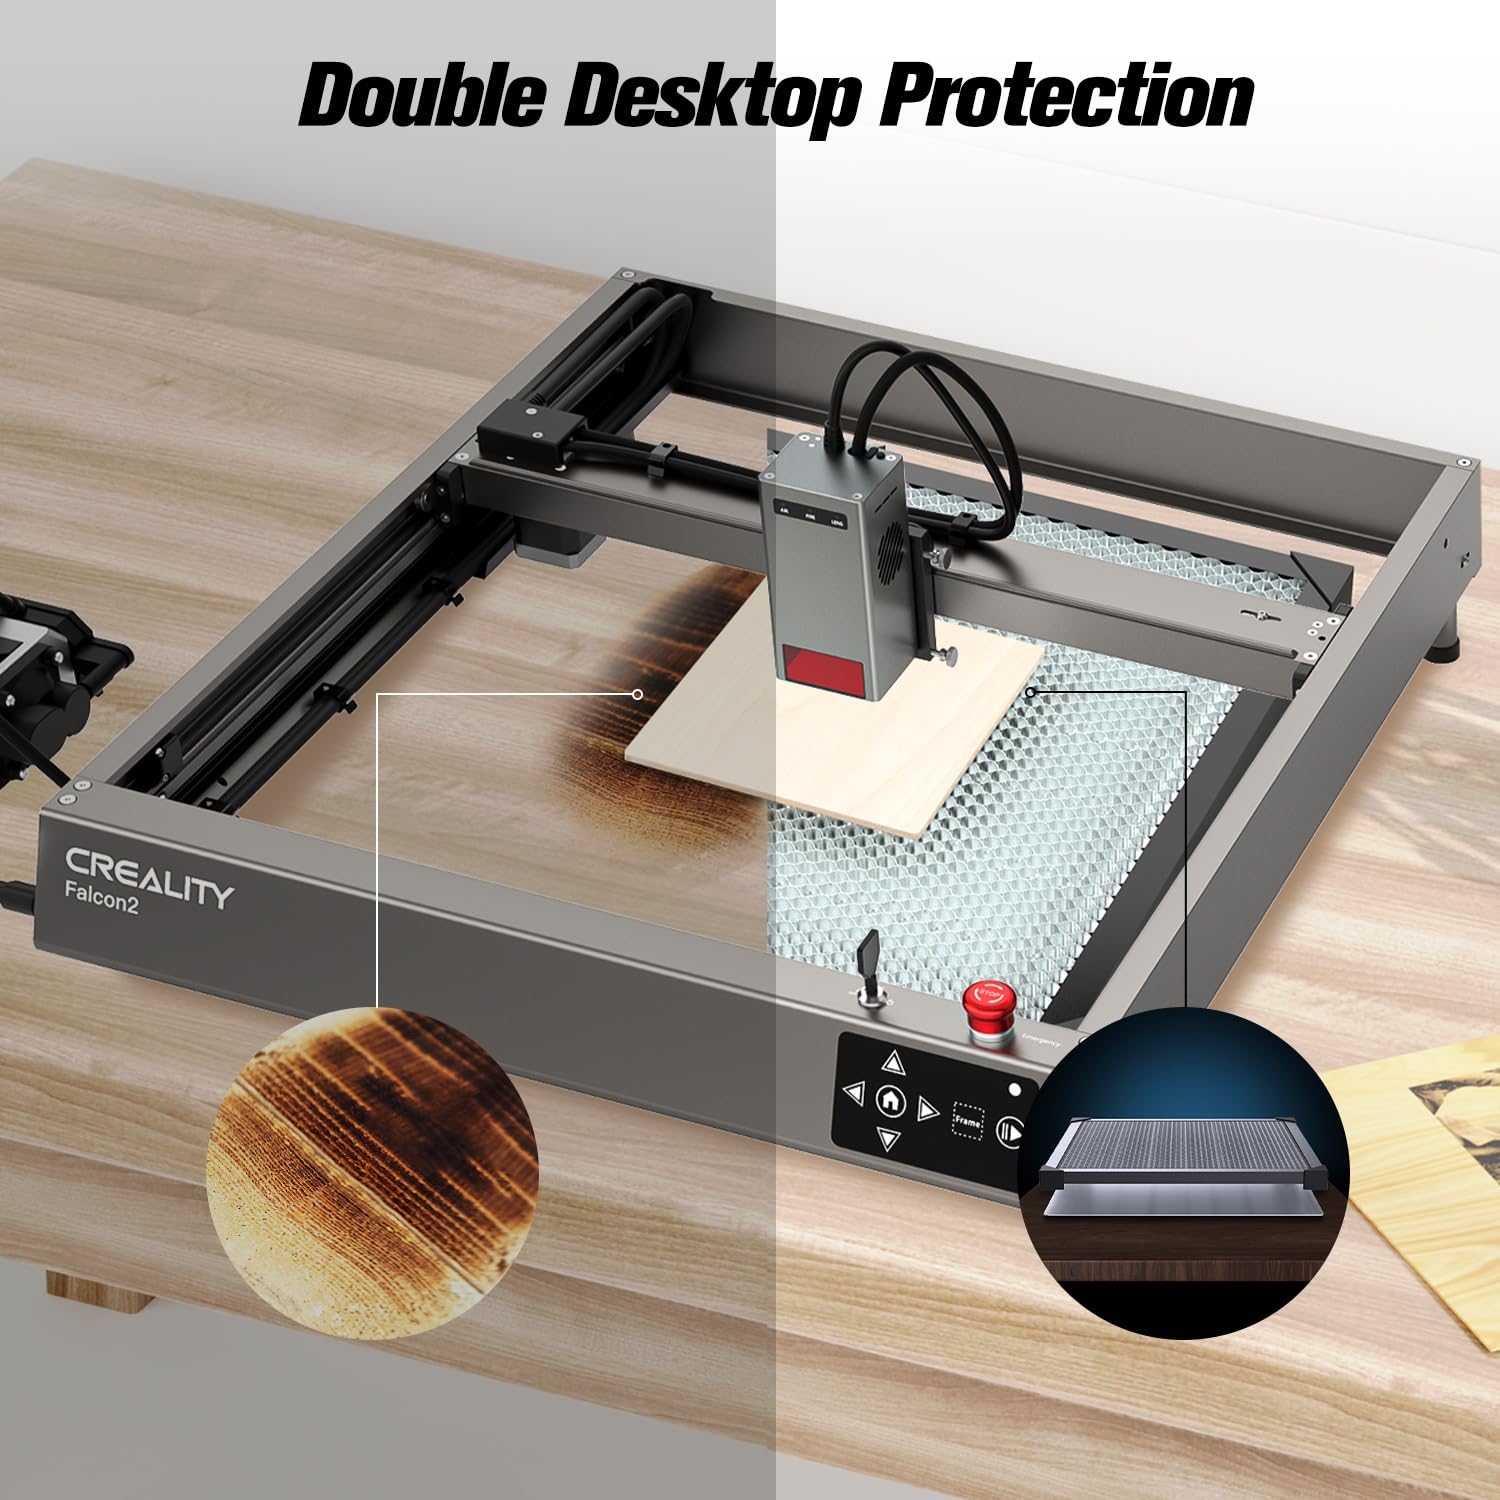 Creality Honeycomb Working Table, Soulmate for Falcon/Falcon2 and Most Laser Engraver and Cutter Machine, Honeycomb Working Panel for Fast Heat Dissipation and Desktop-Protecting,19.68"x 19.68"x 0.87"